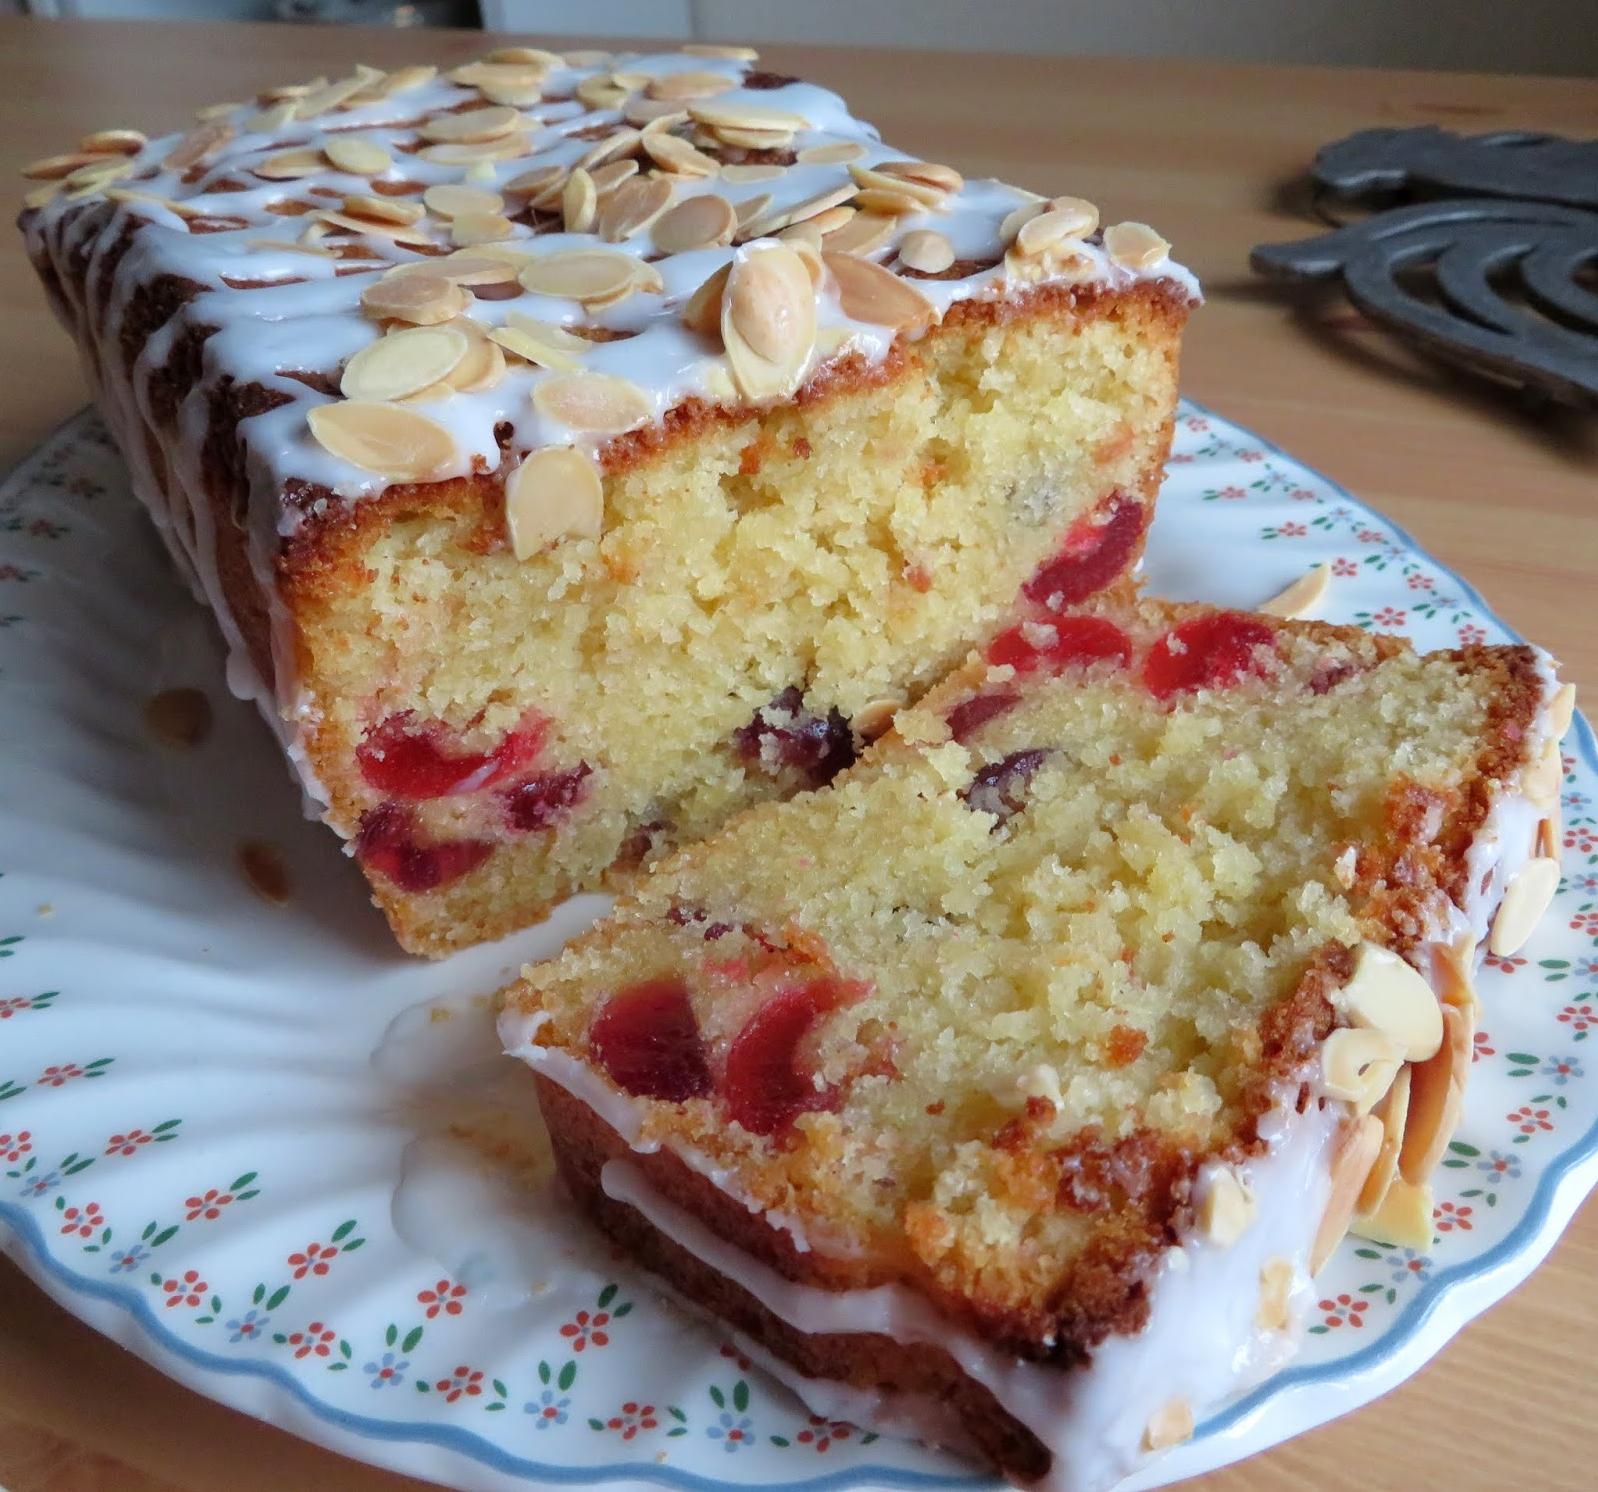  Fresh cherries on top of a soft, buttery cake make for a mouthwatering treat